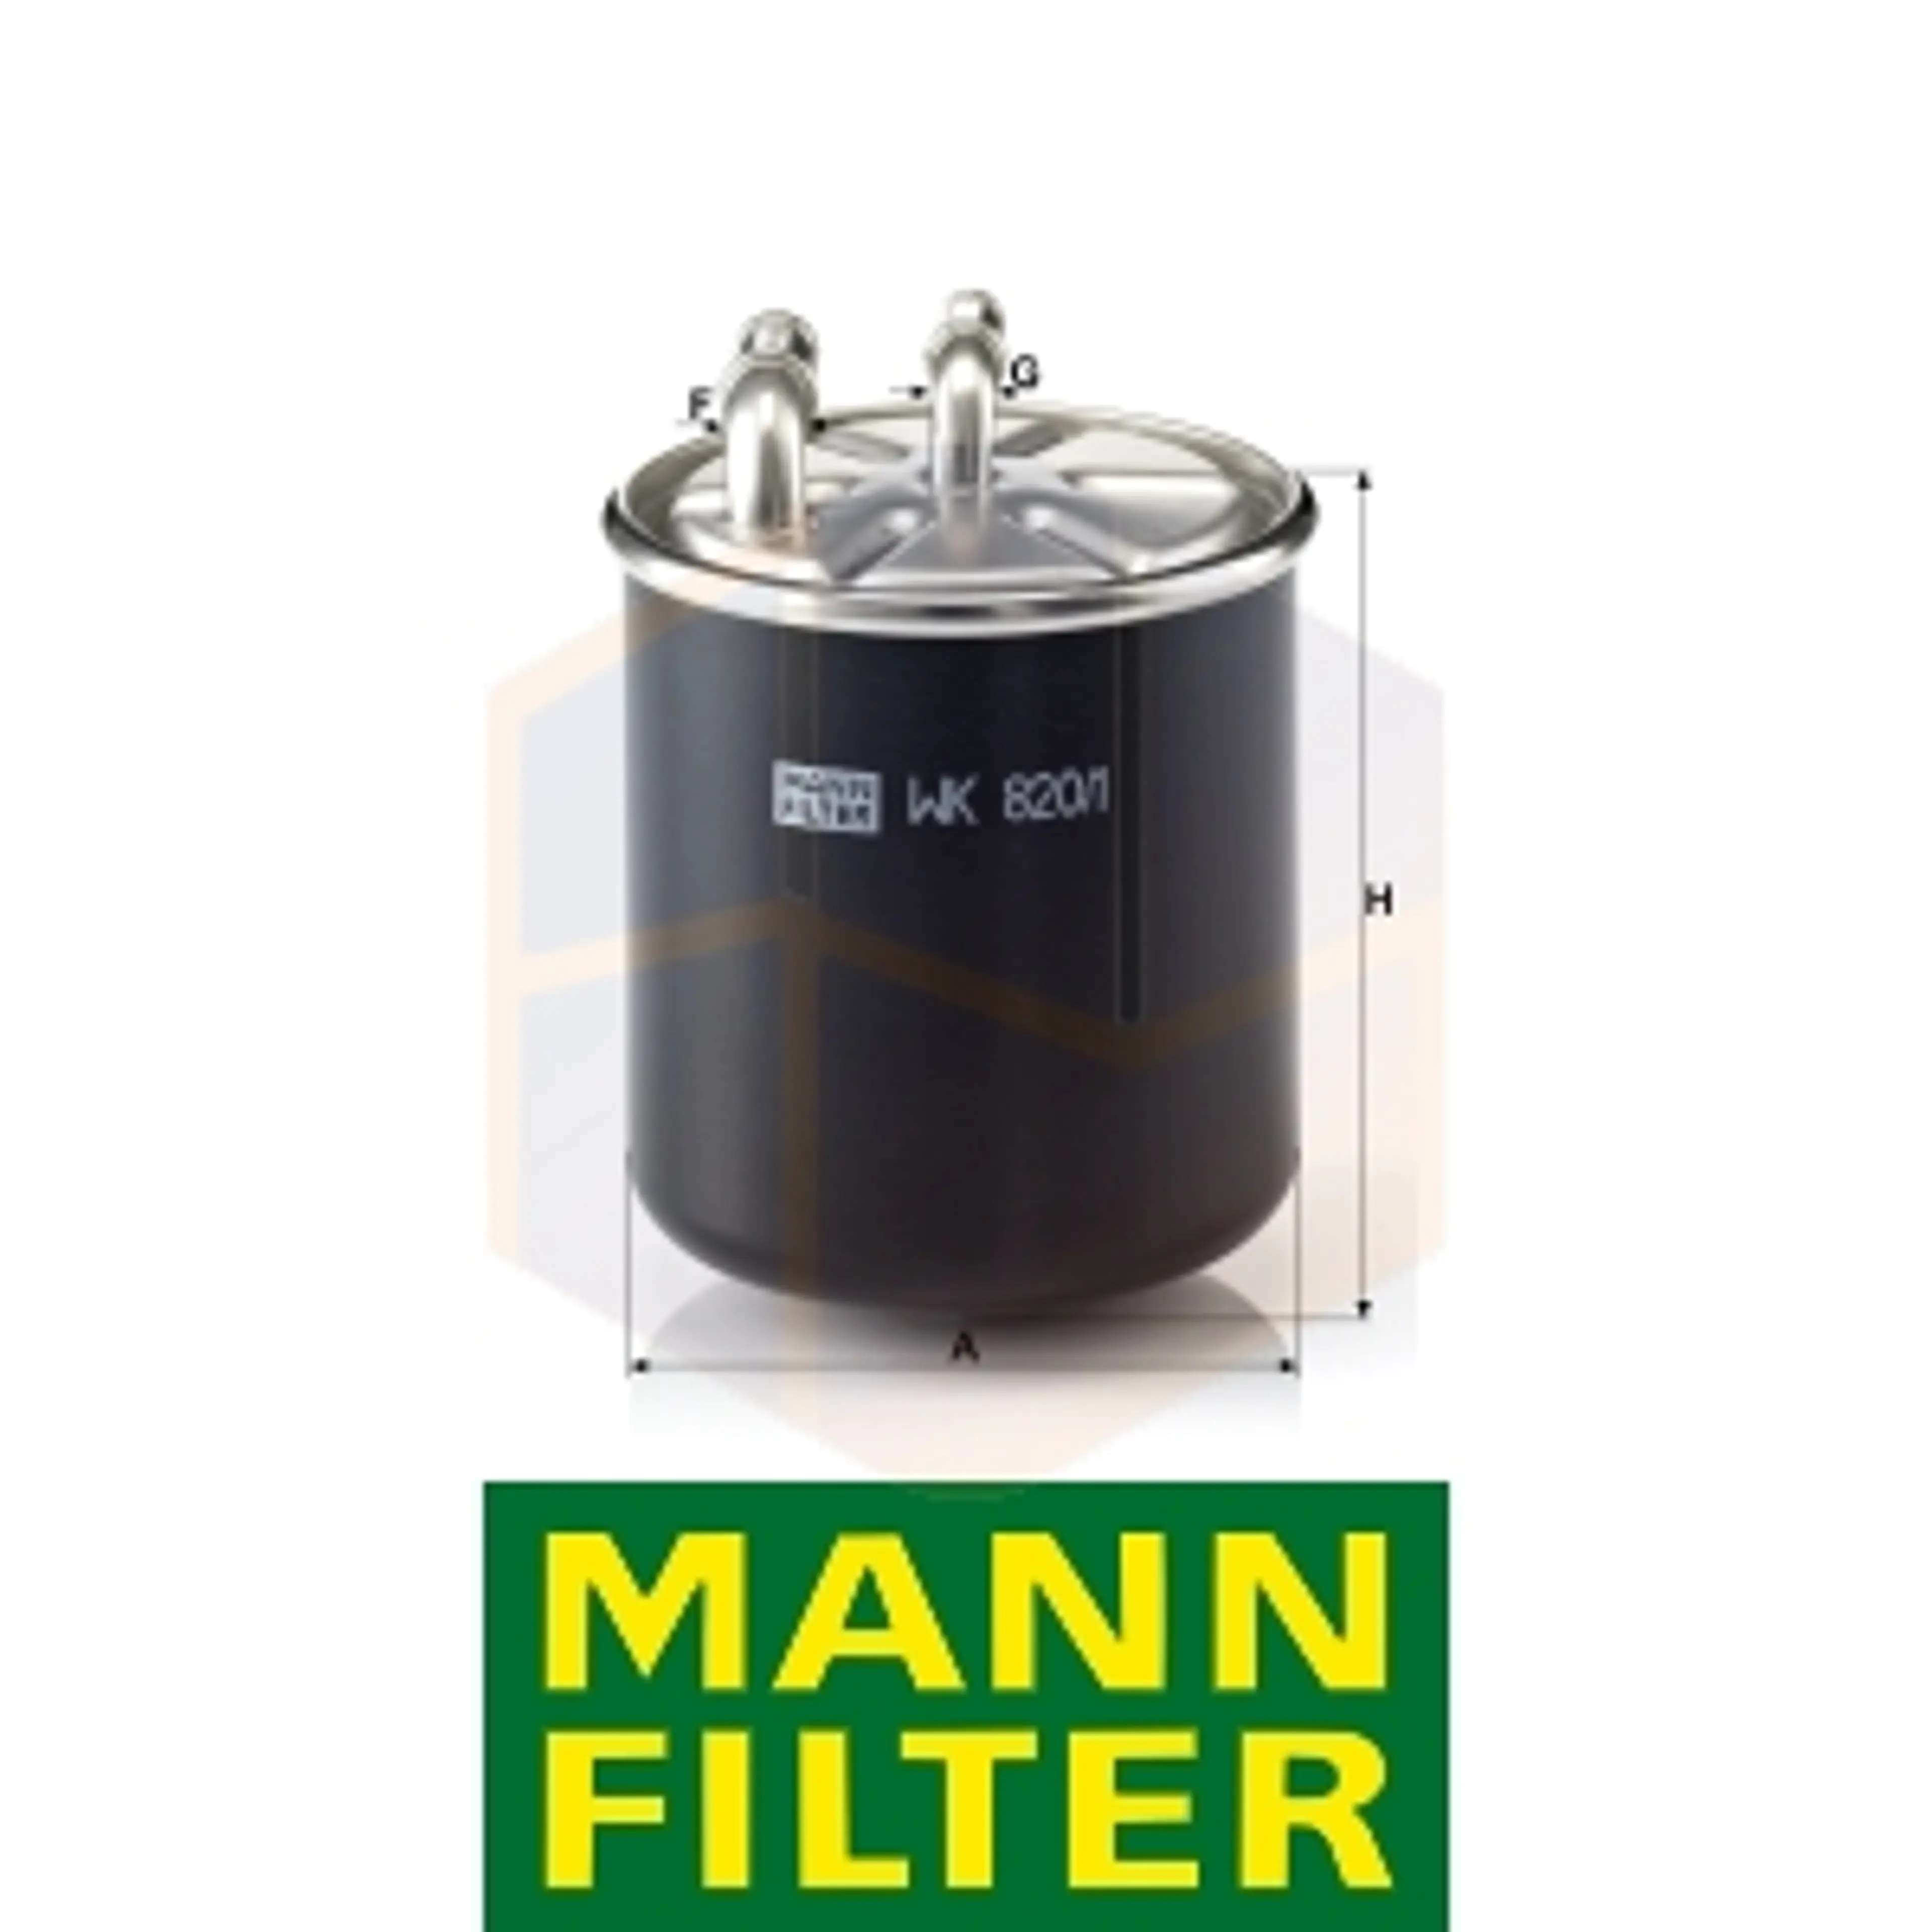 FILTRO COMBUSTIBLE WK 820/1 MANN